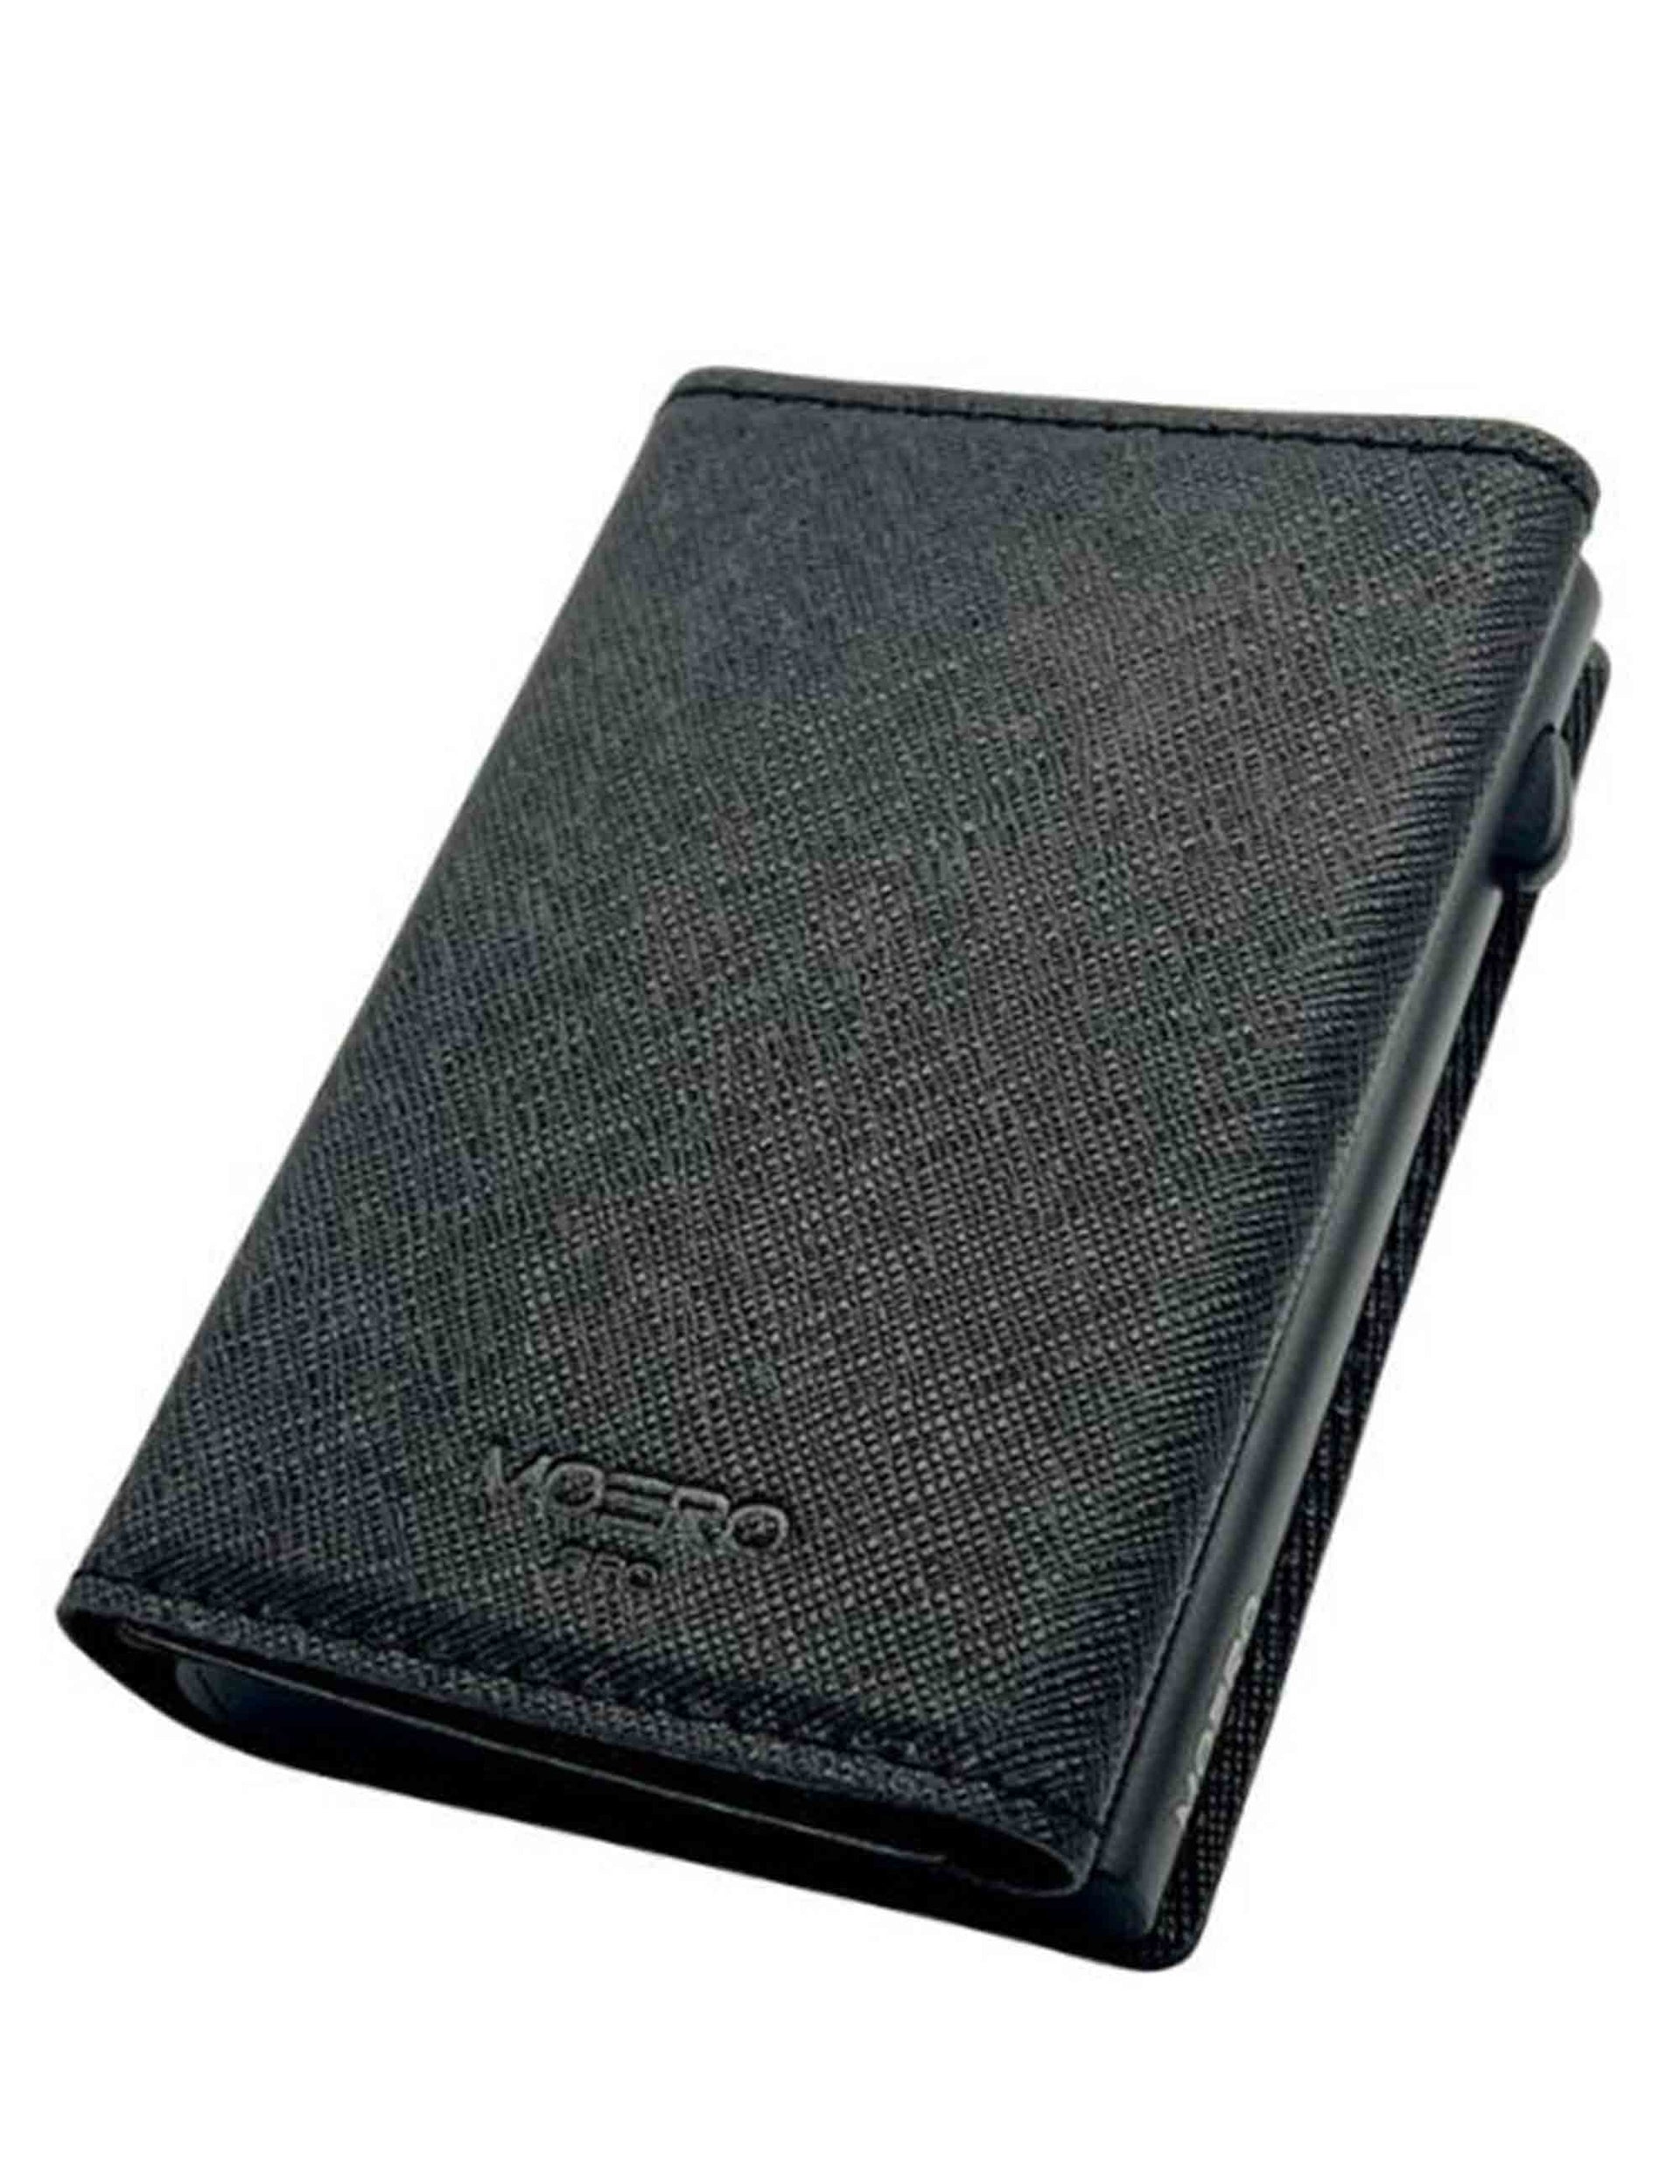 Pro card holder in scratch-resistant black saffiano leather with coin pocket